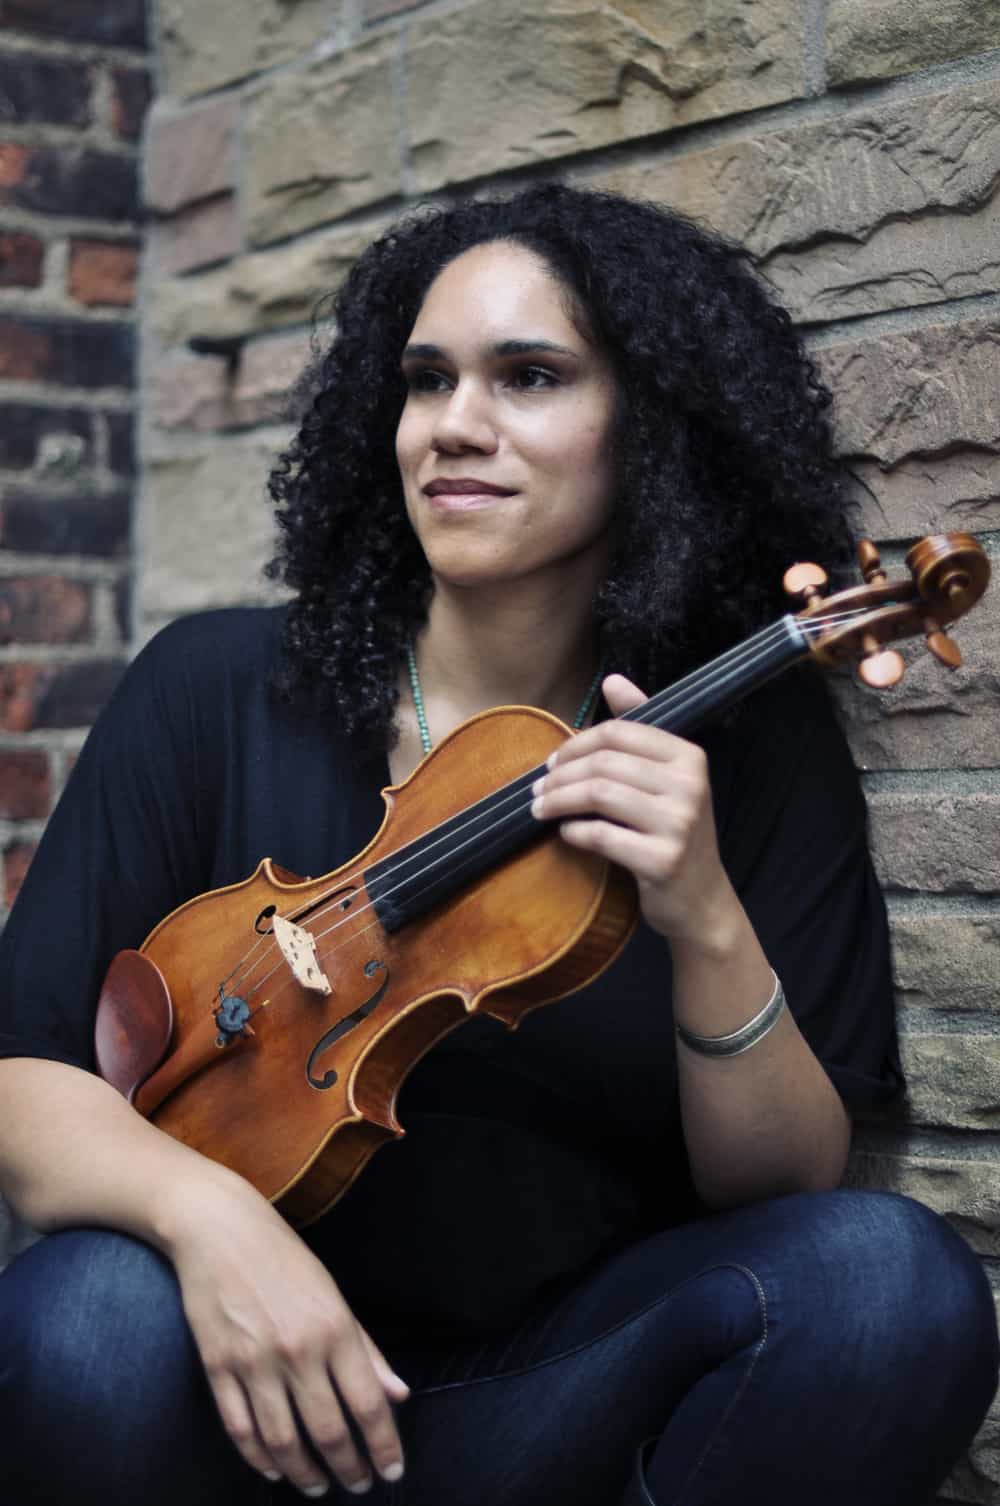 Internationally acclaimed composer and violinist Jessie Montgomery sits with her violin. Press photo courtesy of the BSO and the composer.